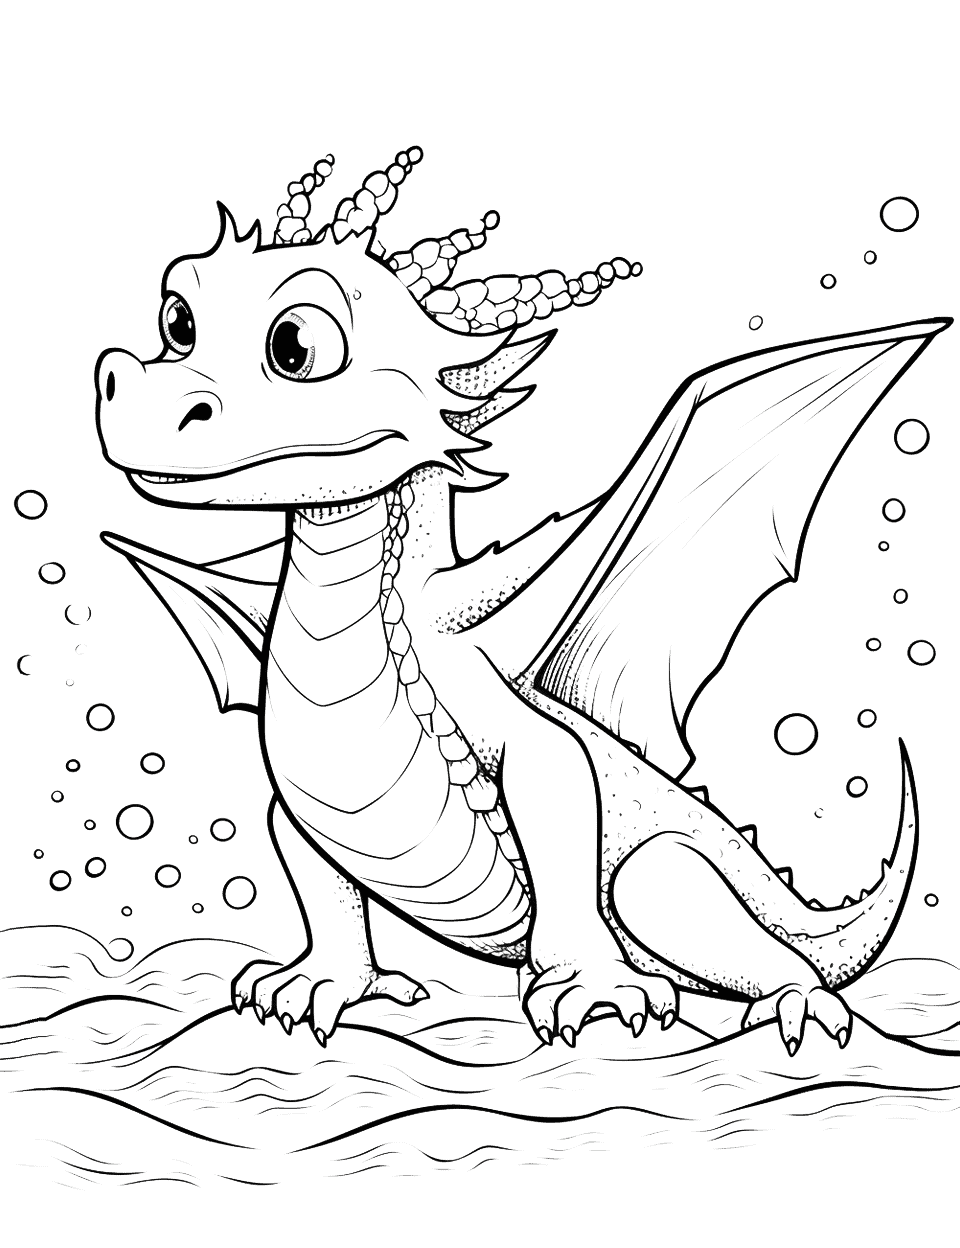 Cool Water Dragon Coloring Page - A cool water dragon, swimming gracefully under the sea.